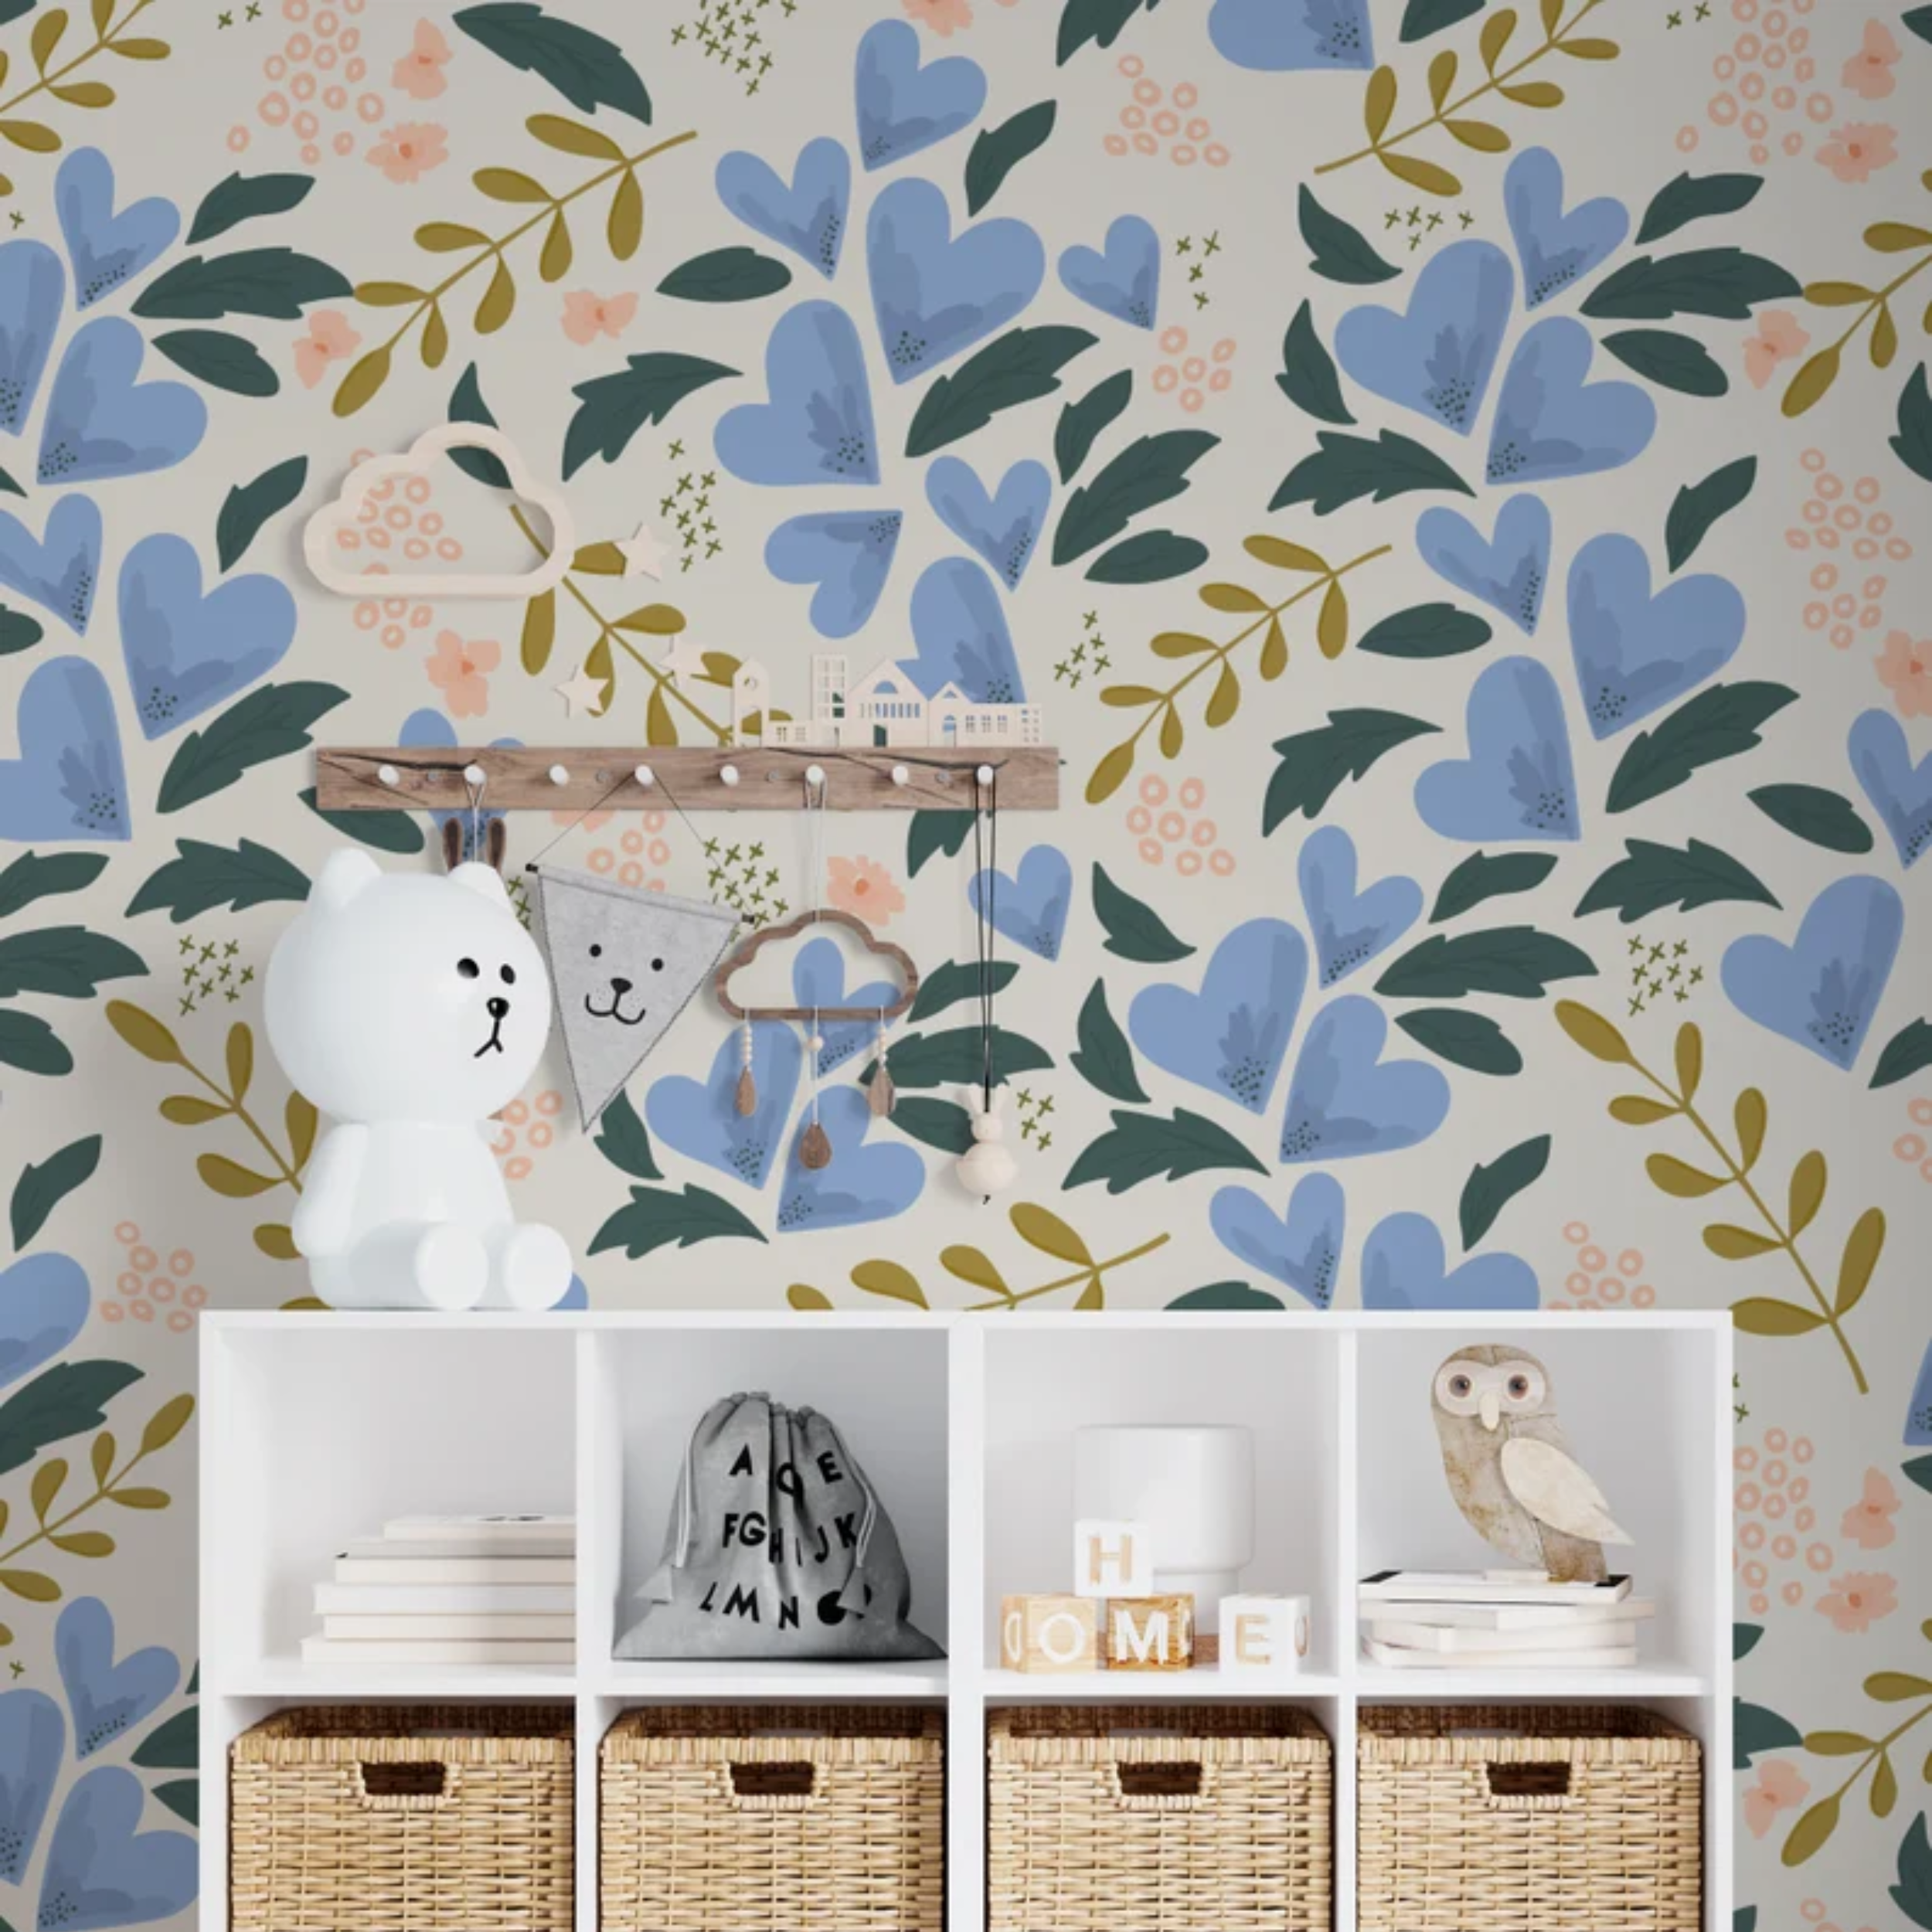 A playful children's room corner enhanced by 'Floral Love Wallpaper II,' which adds a gentle, whimsical touch with its heart-shaped floral patterns and soothing colors, alongside a white shelf with children's toys and decor